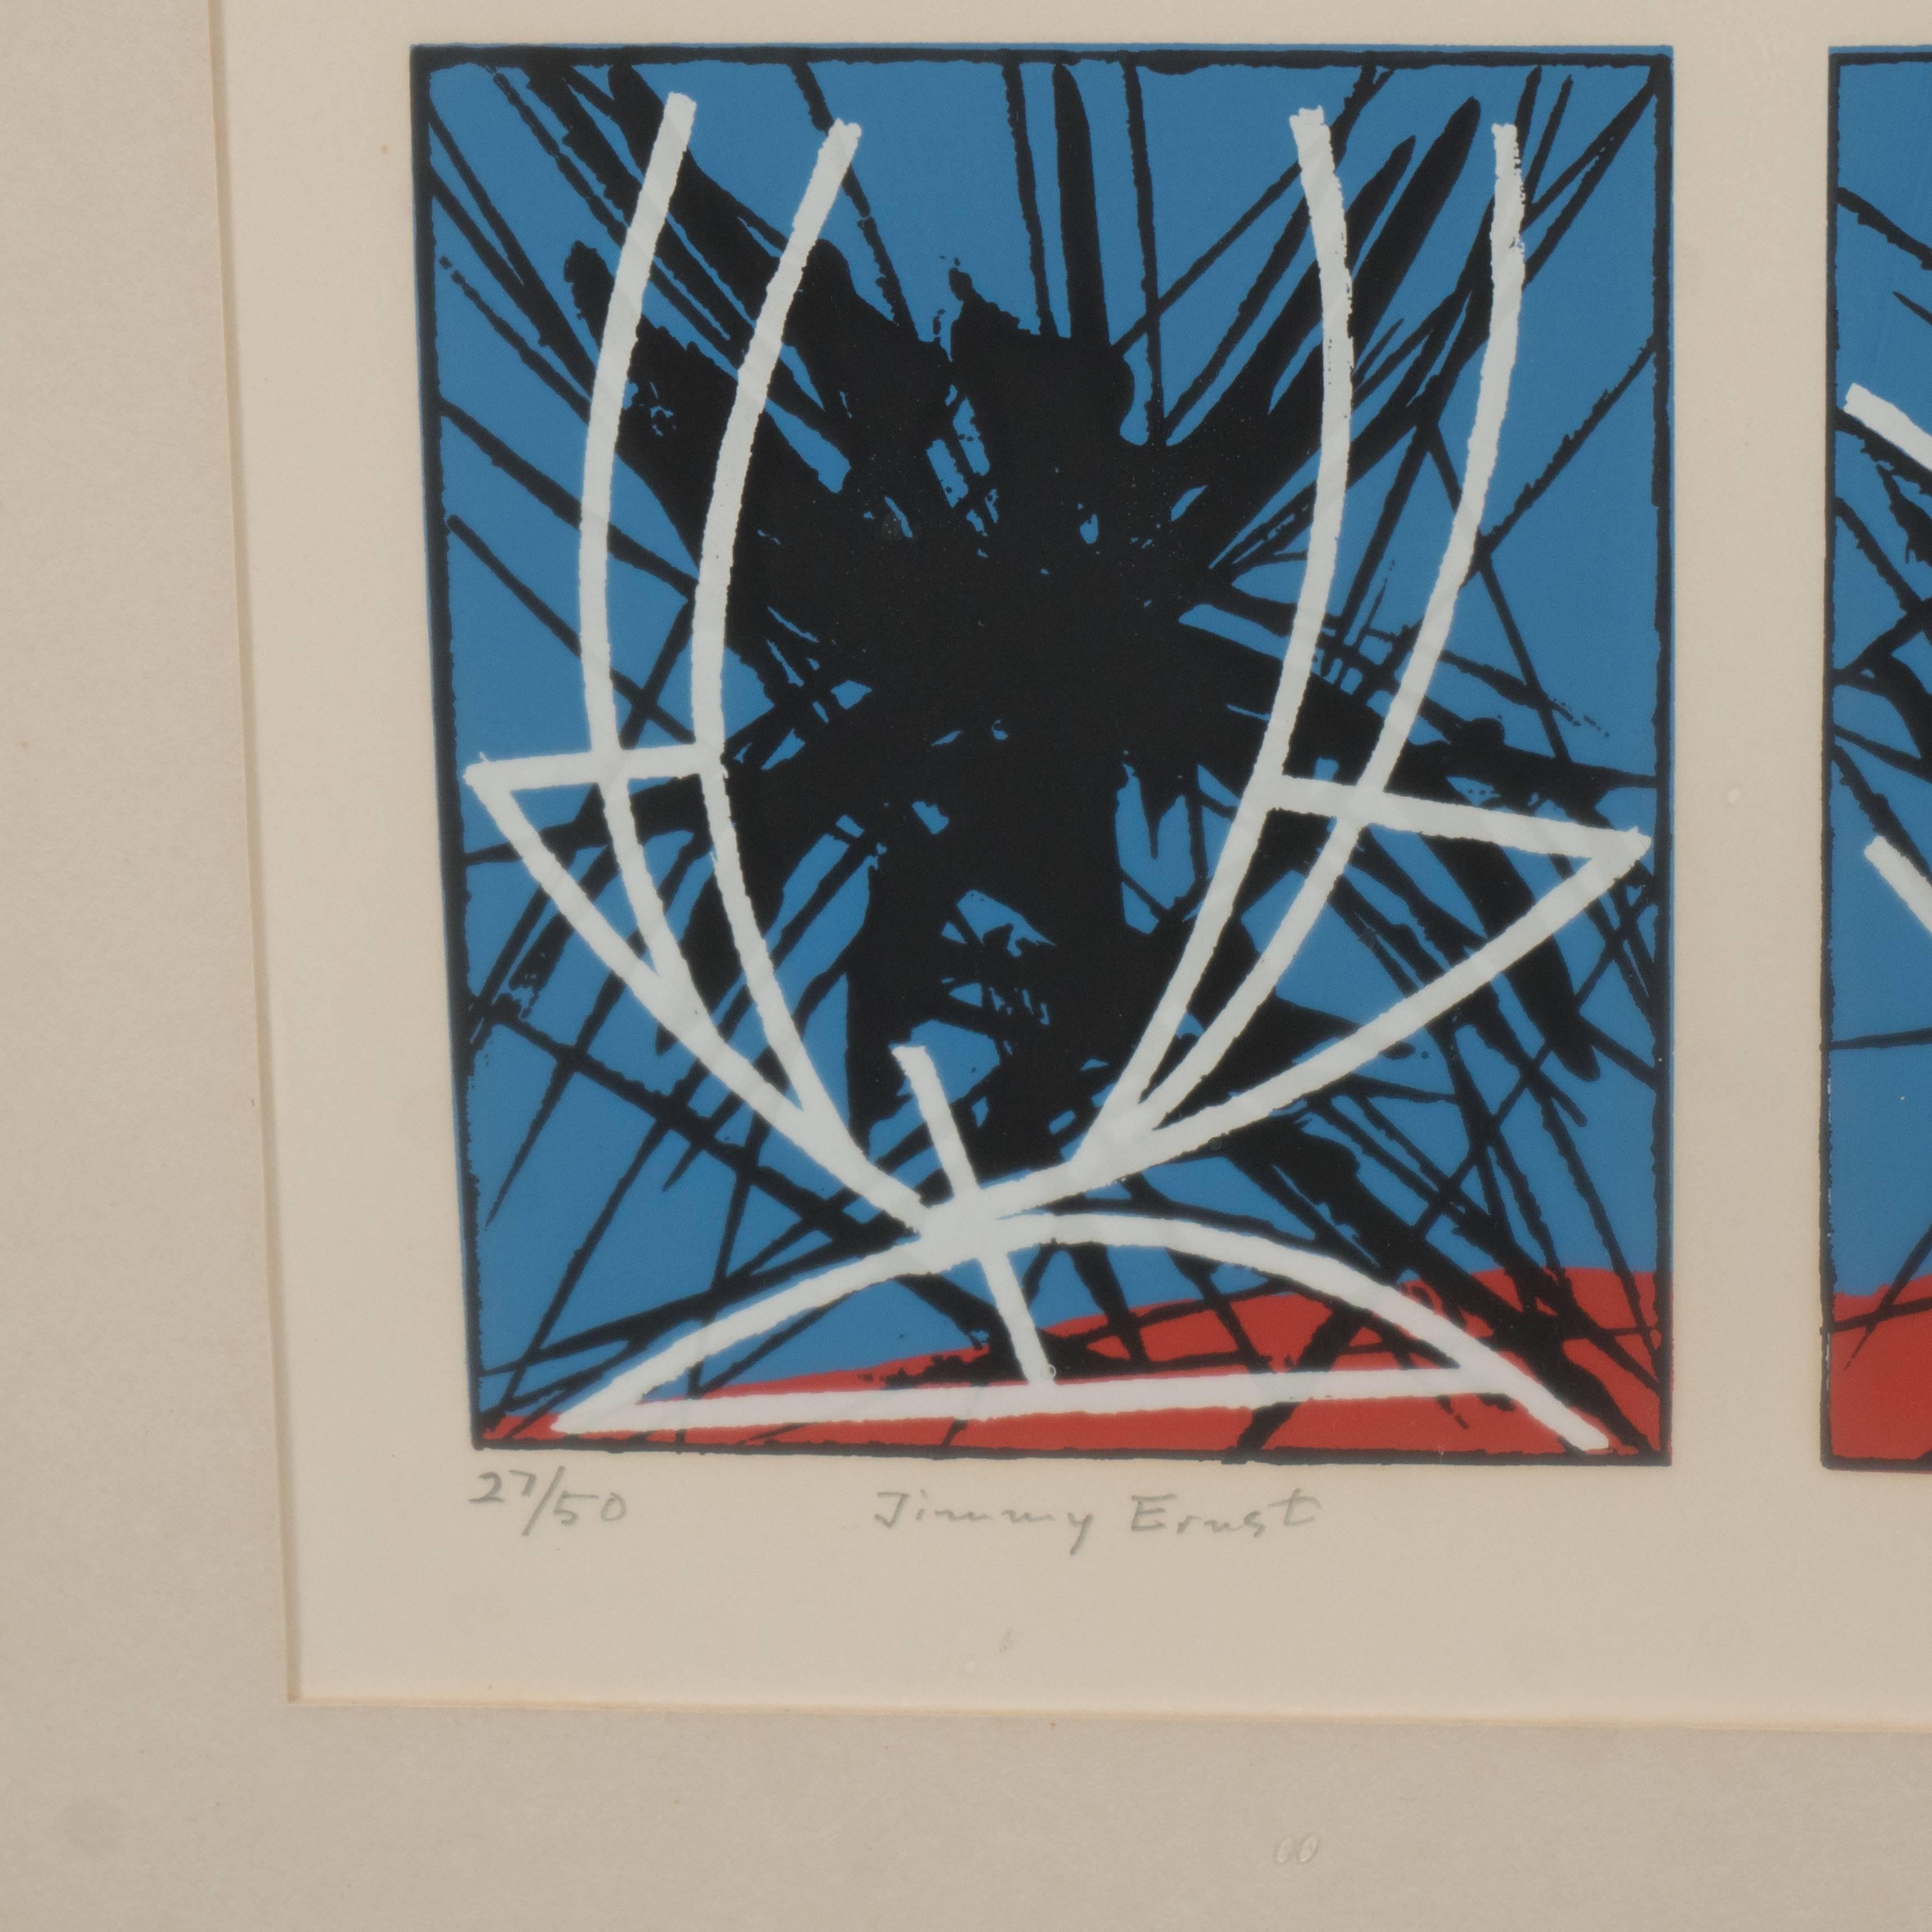 This striking Mid Century Modern screen print was realized by the esteemed artist Jimmy Ernst in 1969. It features sixteen rectangular blocks with red and blue backgrounds with highly gestural black markings decorating the centers overlaid by